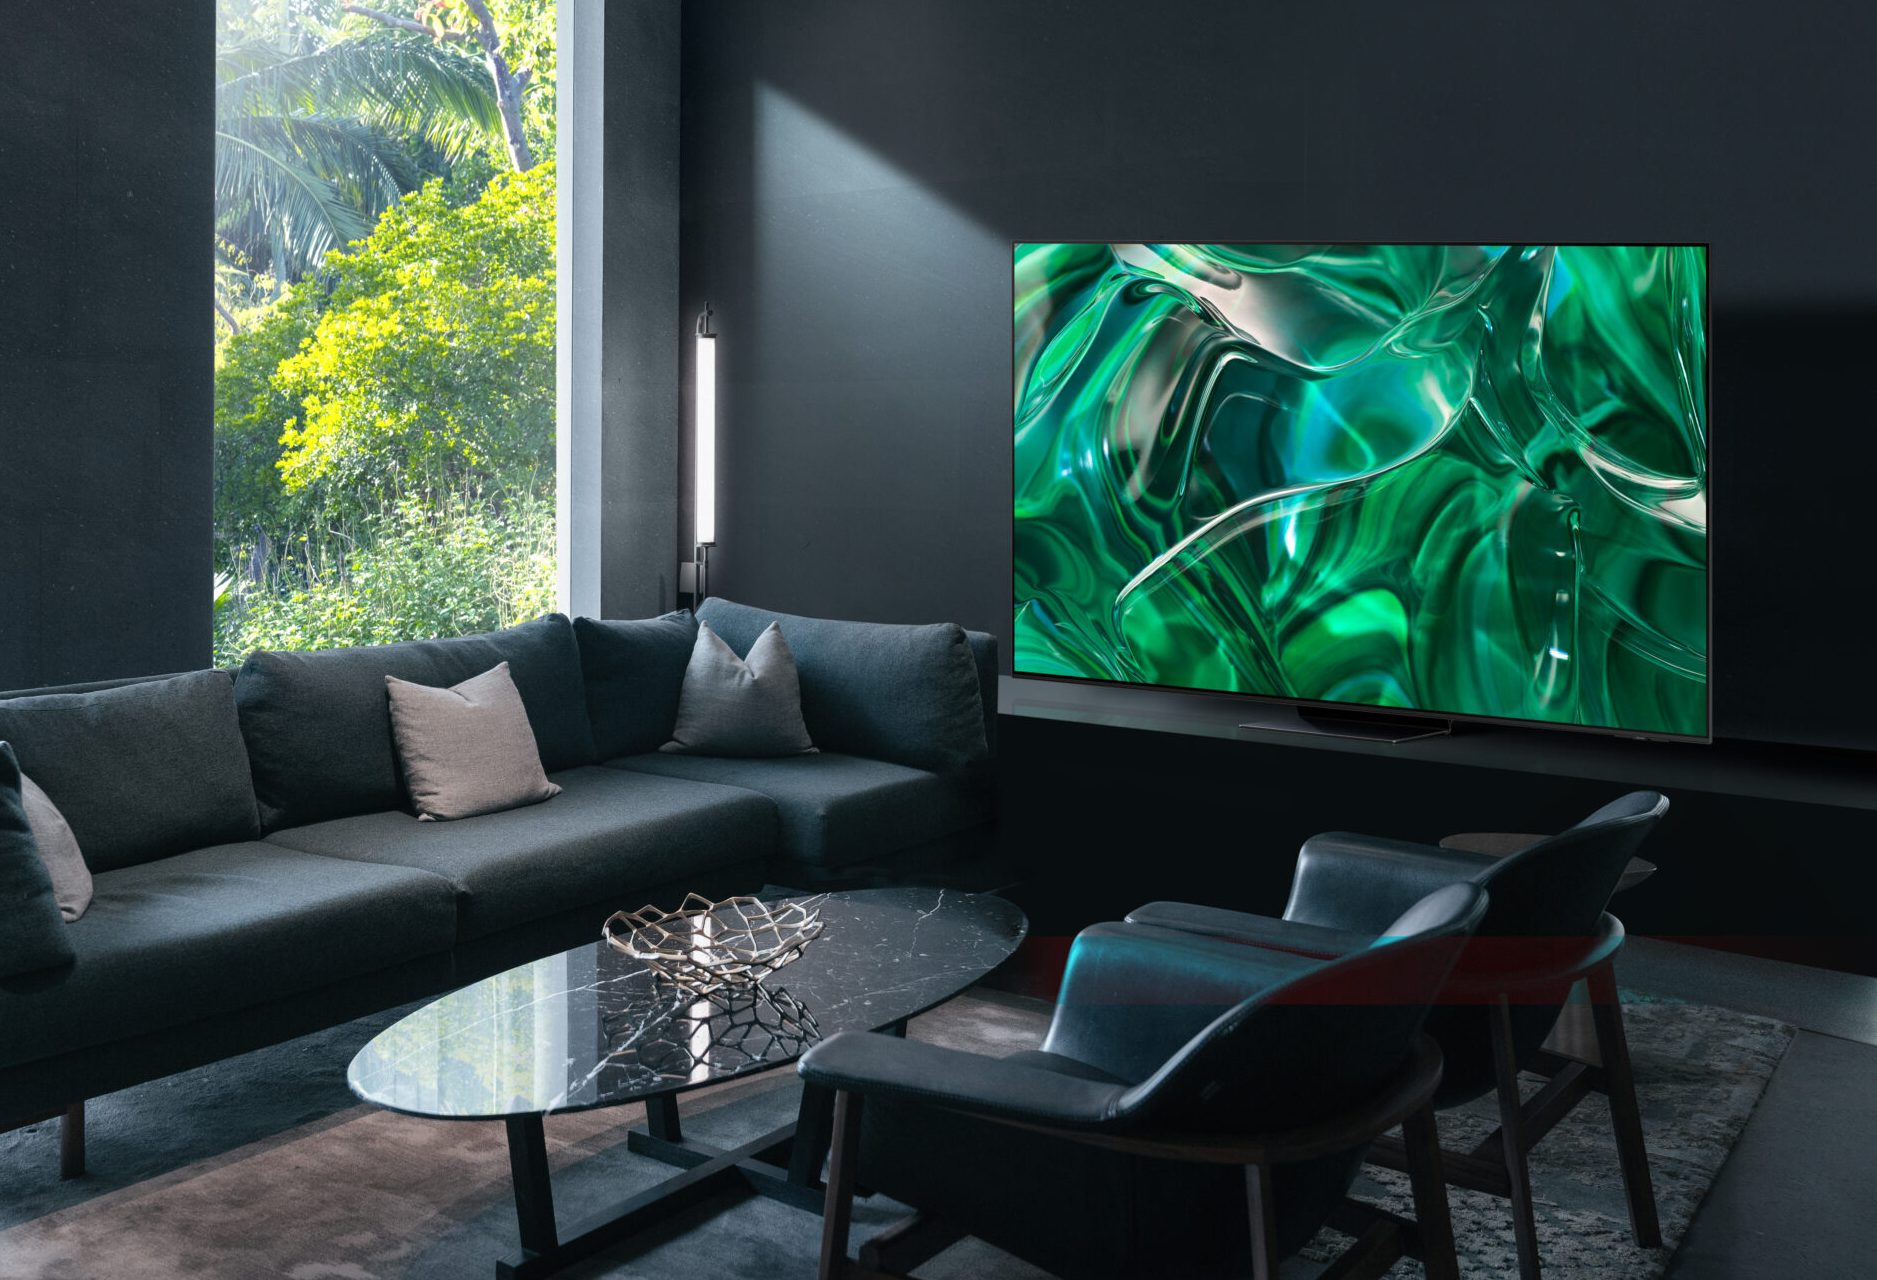 This 65-inch Samsung OLED TV is $500 off for a limited time